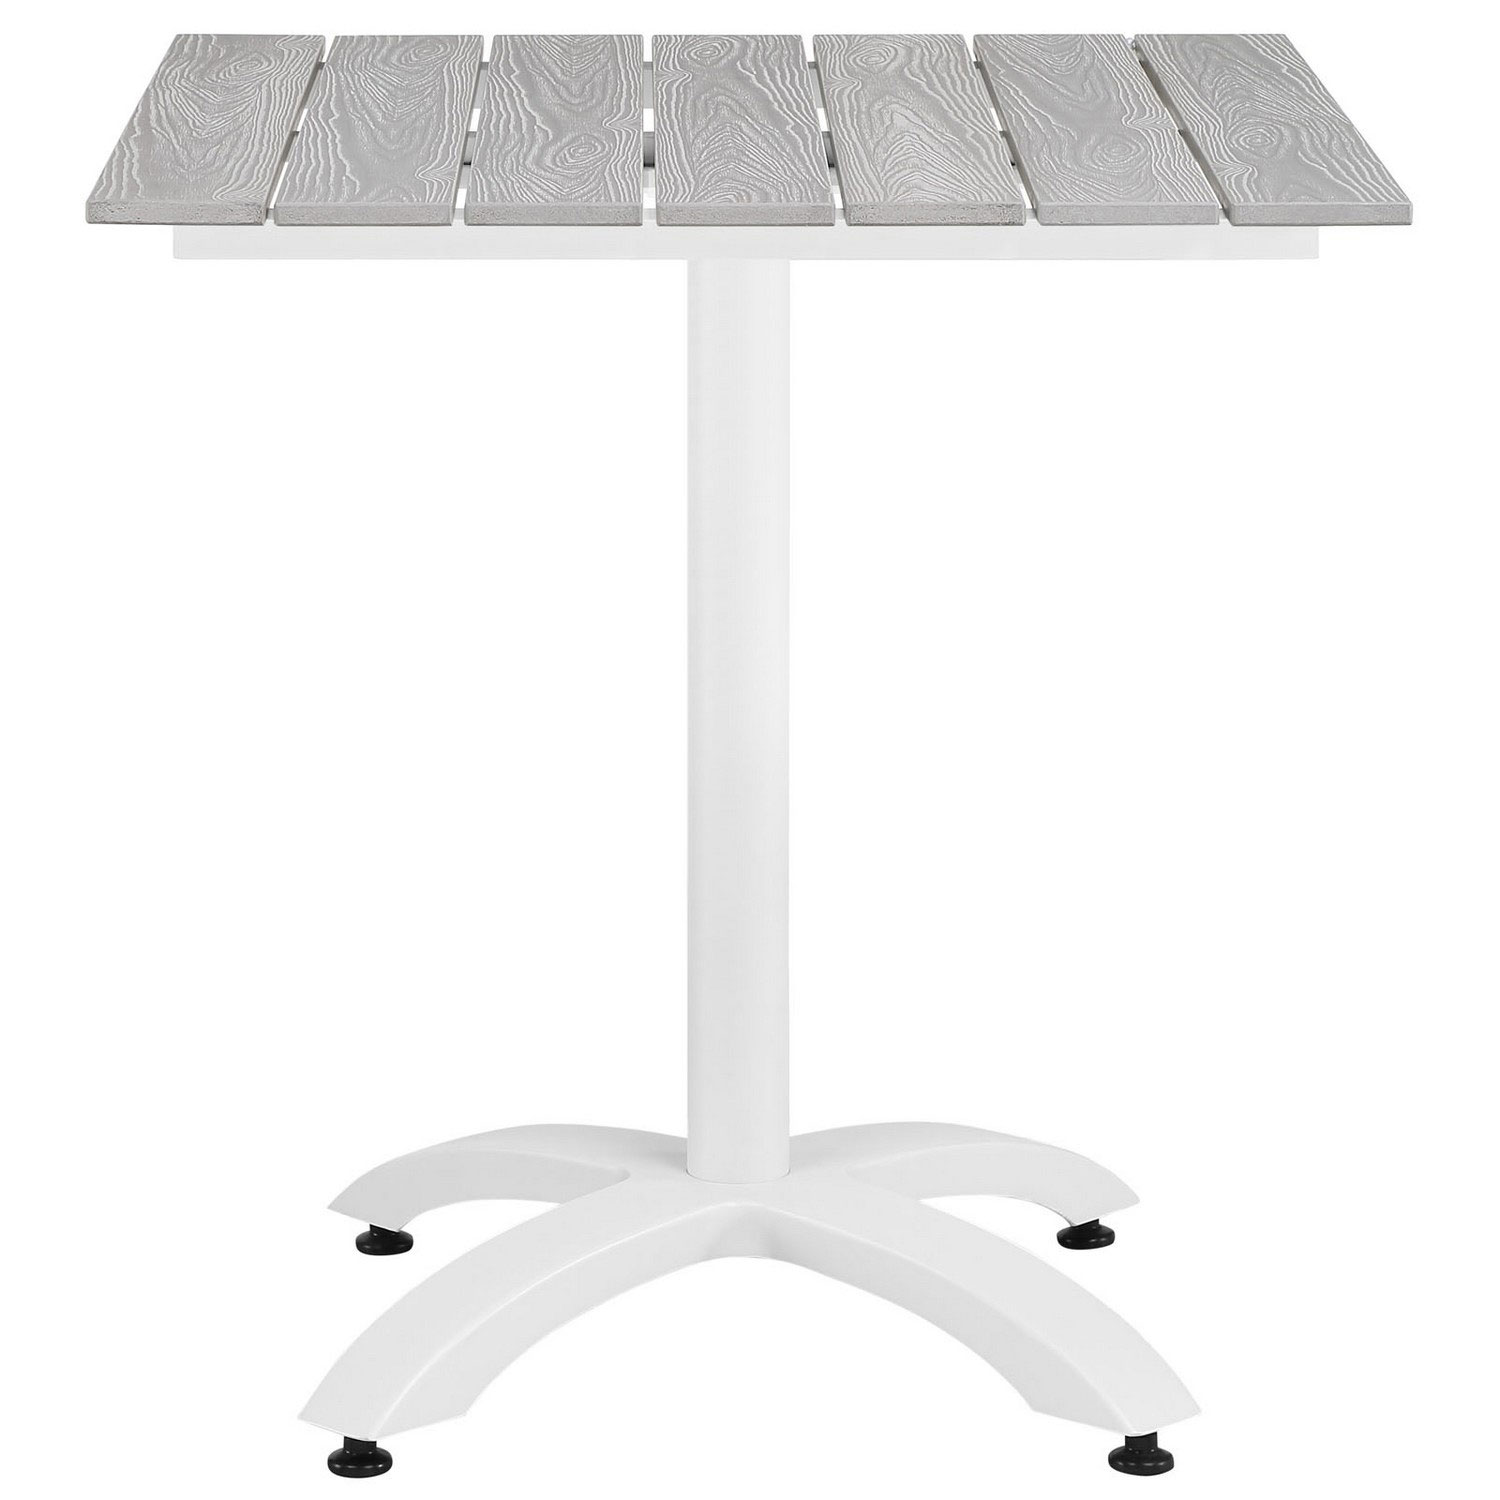 Modway Maine 28 Outdoor Patio Dining Table - White/Light Gray